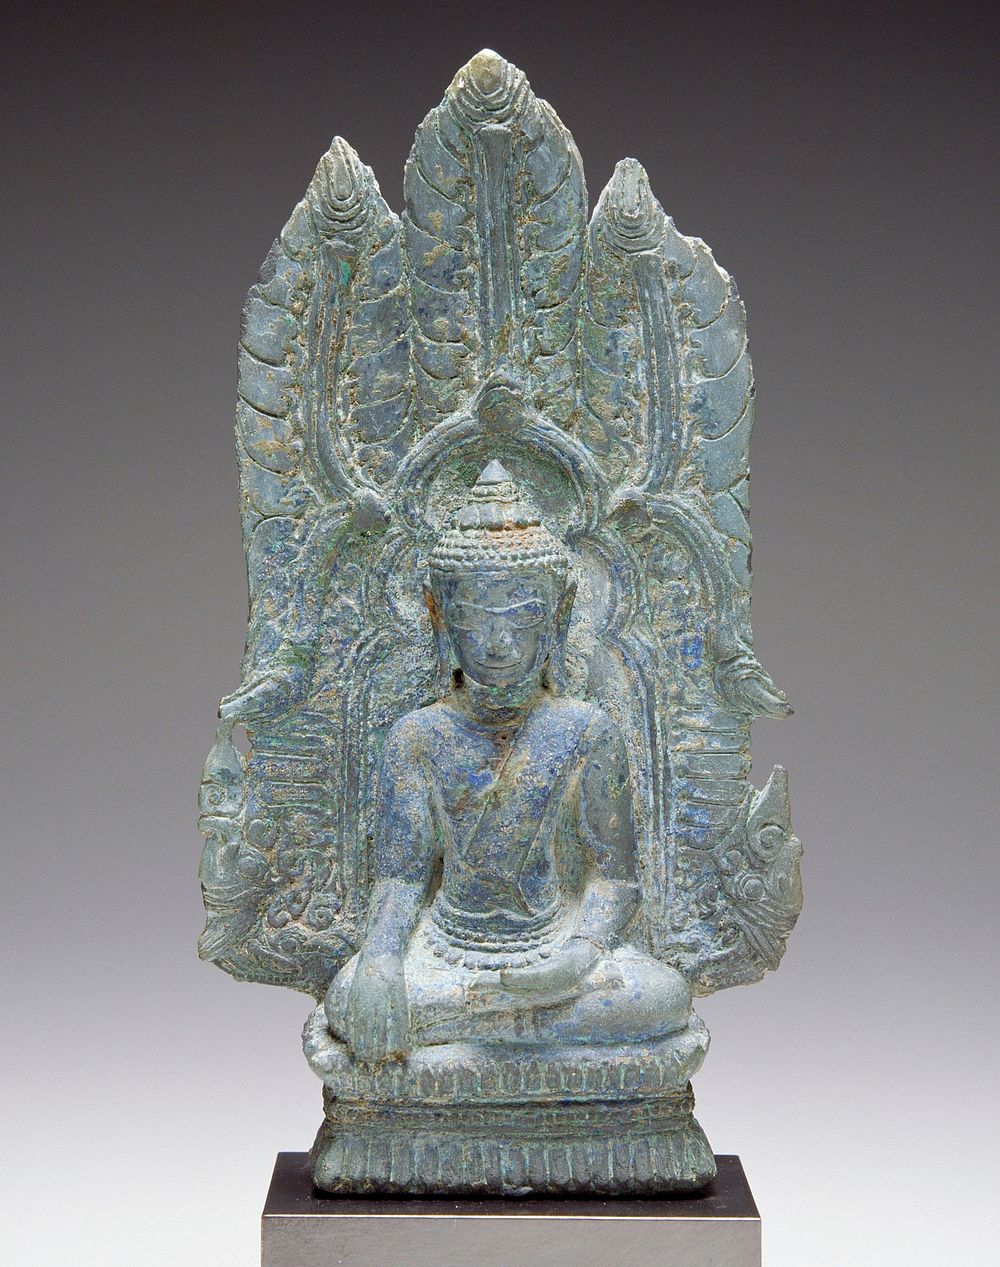 seated Buddha with PL hand palm up on lap and PR hand on knee; organic, leaflike designs on back of throne; attached to…